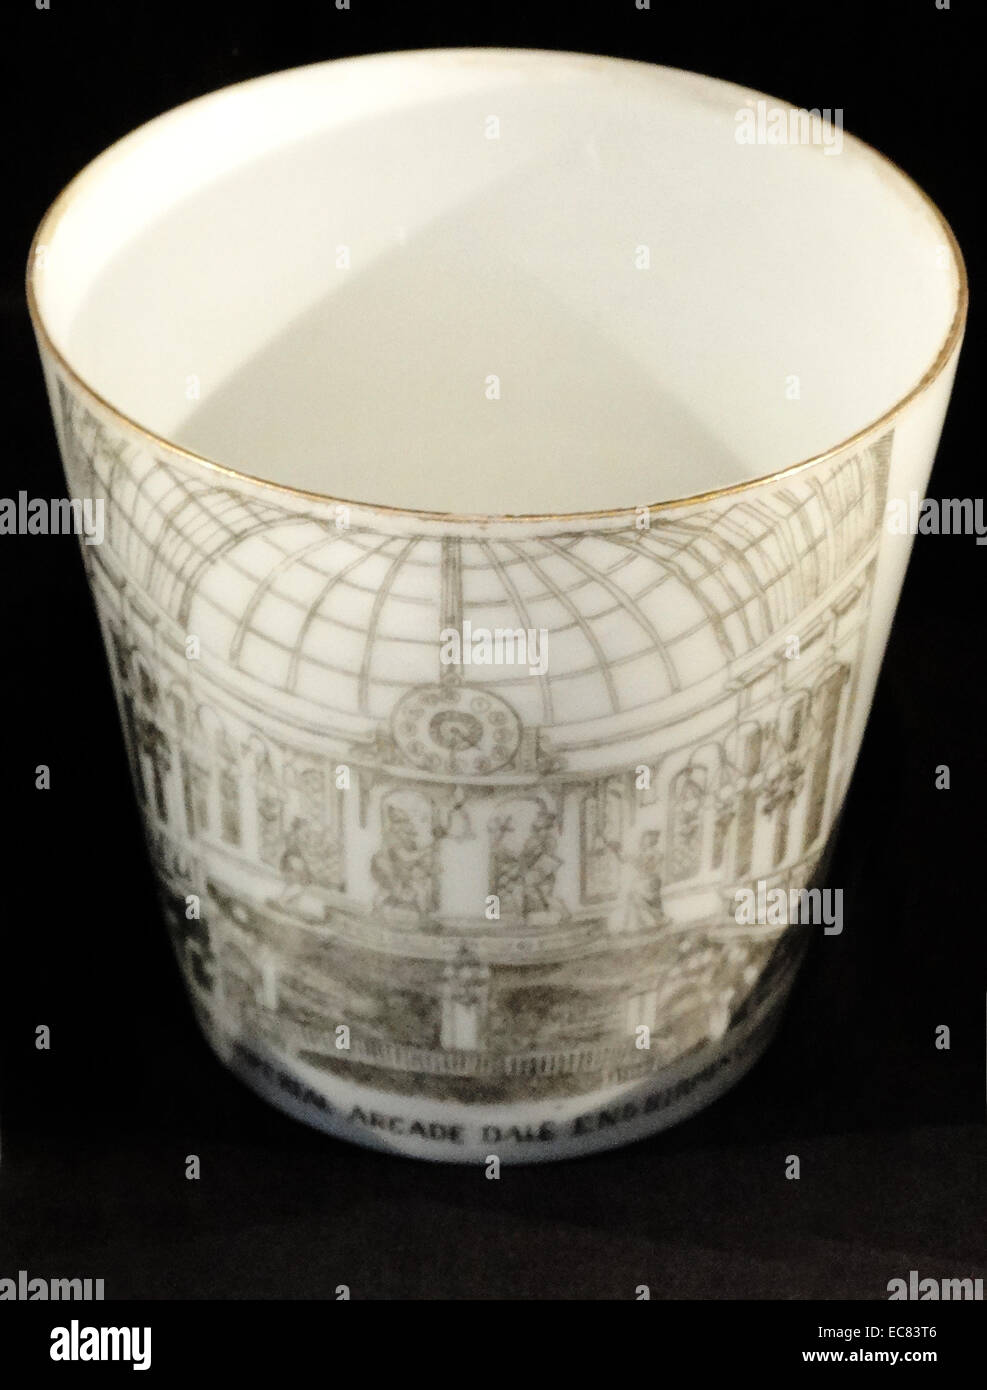 Cup commemorating Imperial Arcade. Stock Photo